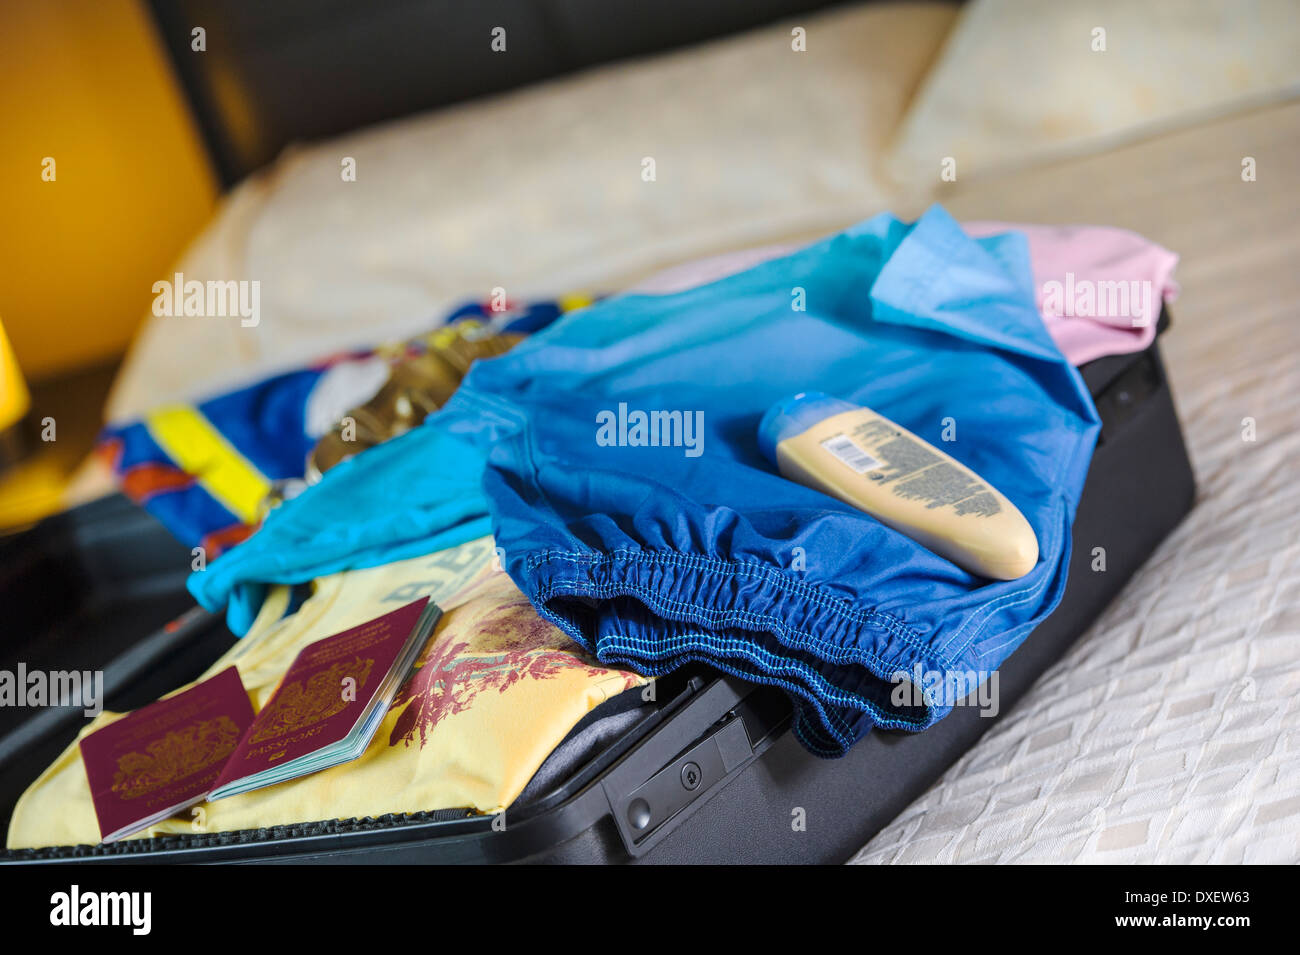 Holiday suitcase being unpacked in a hotel bedroom. Stock Photo